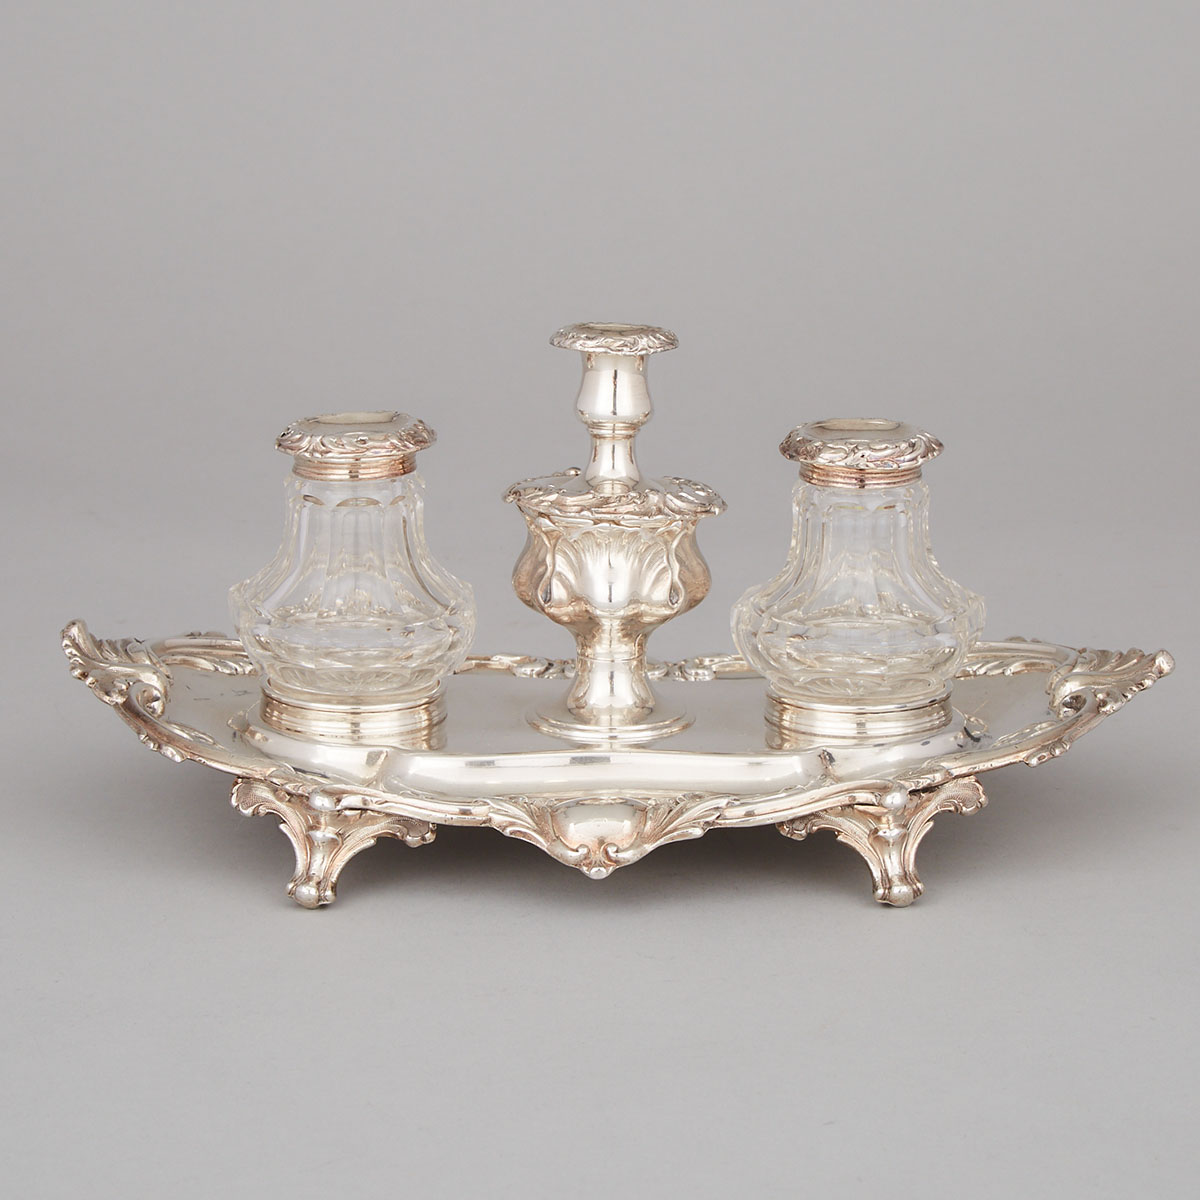 Victorian Silver Plate and Cut Glass Inkstand, c.1840